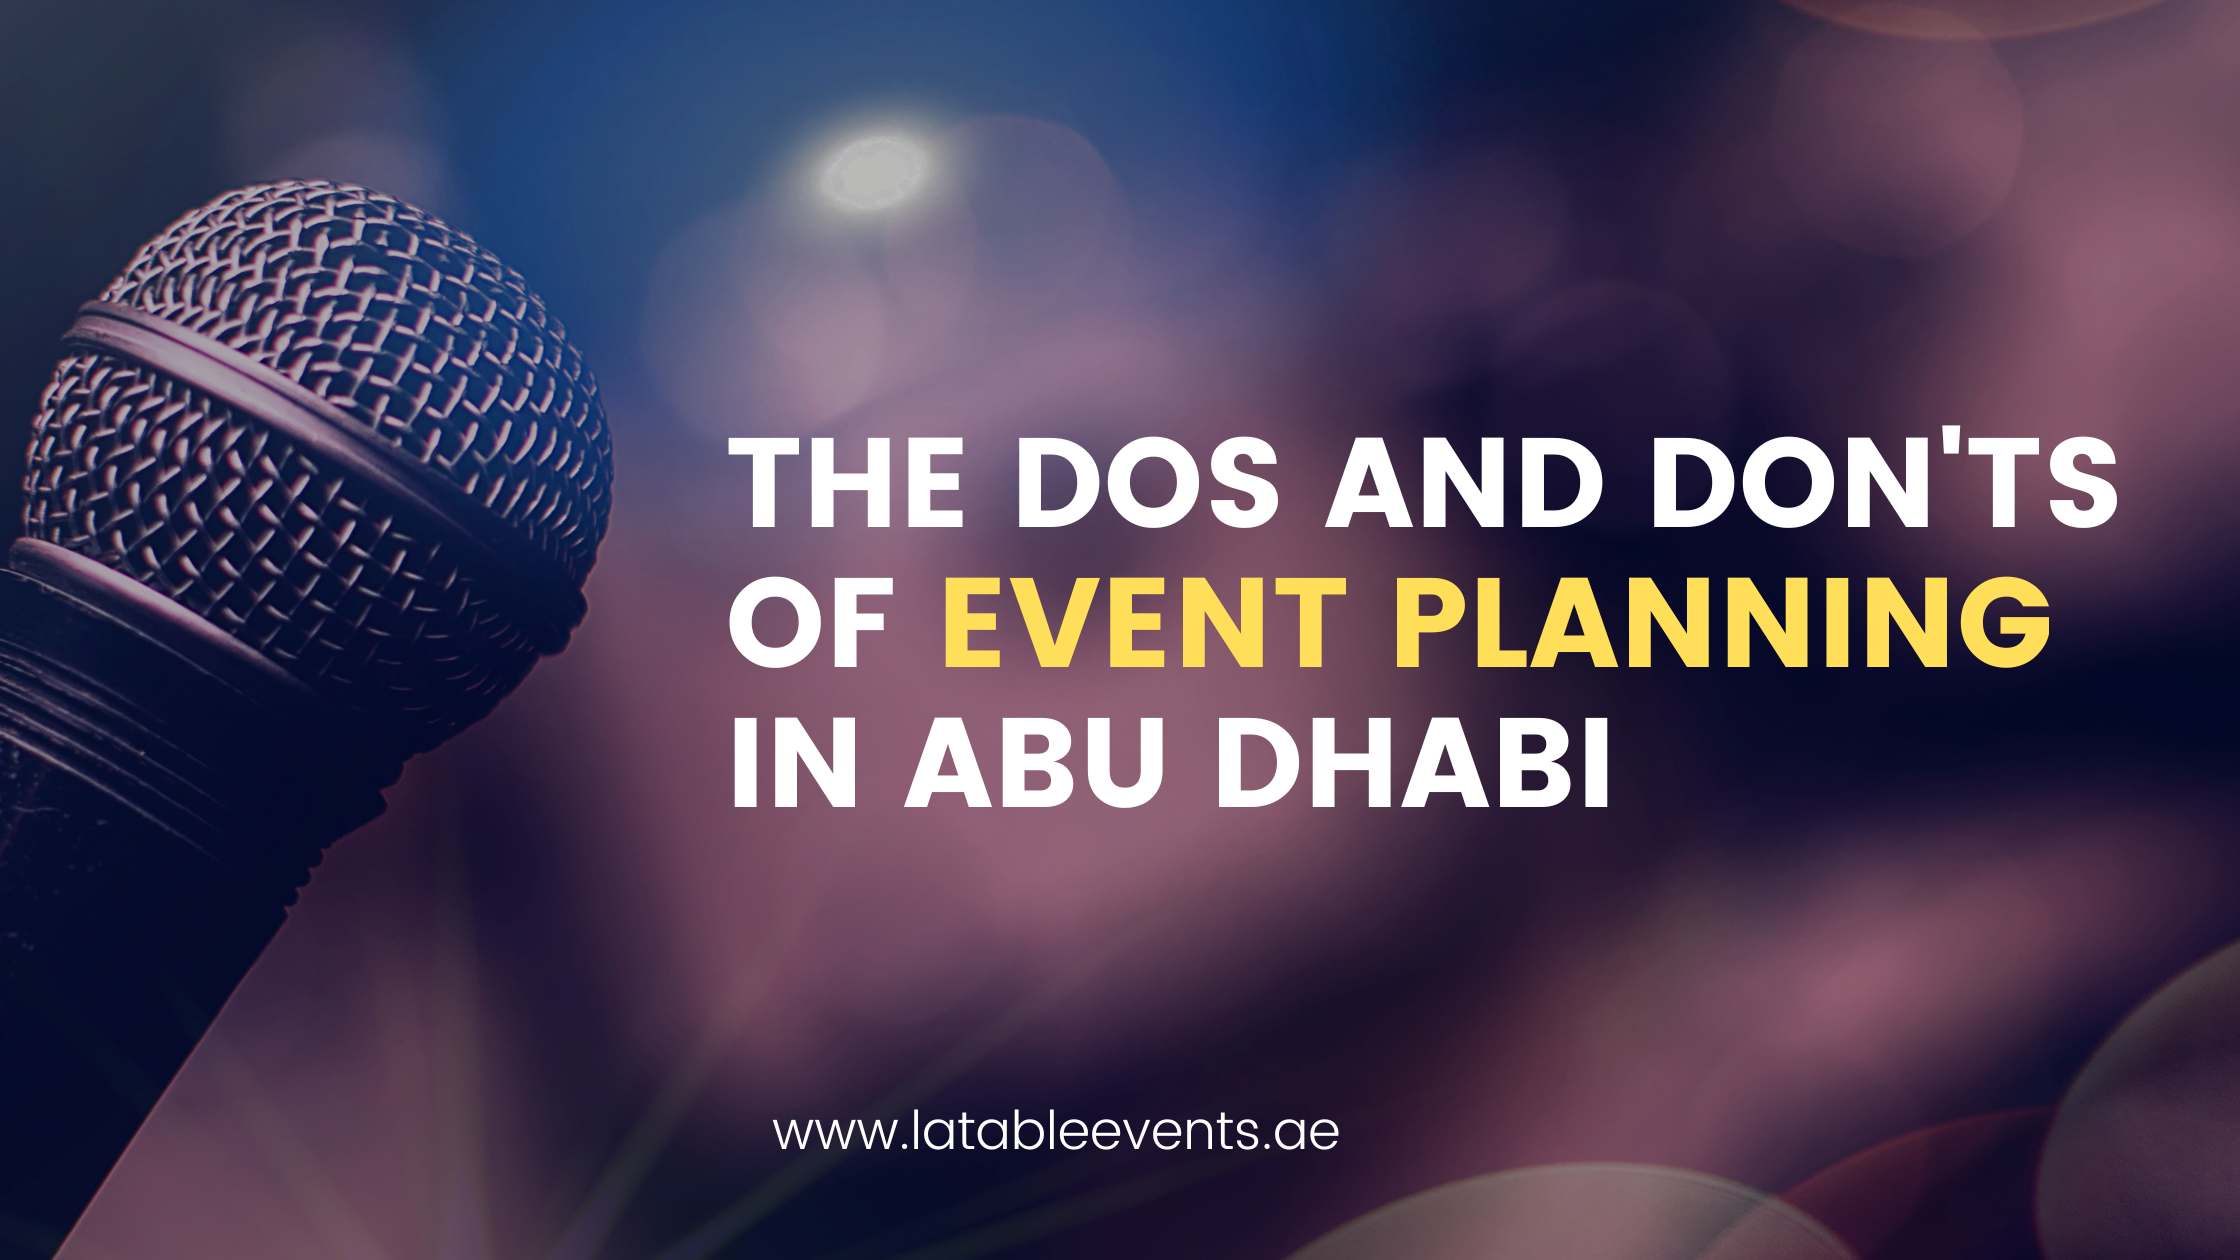 The Dos and Don'ts of Event Planning in Abu Dhabi